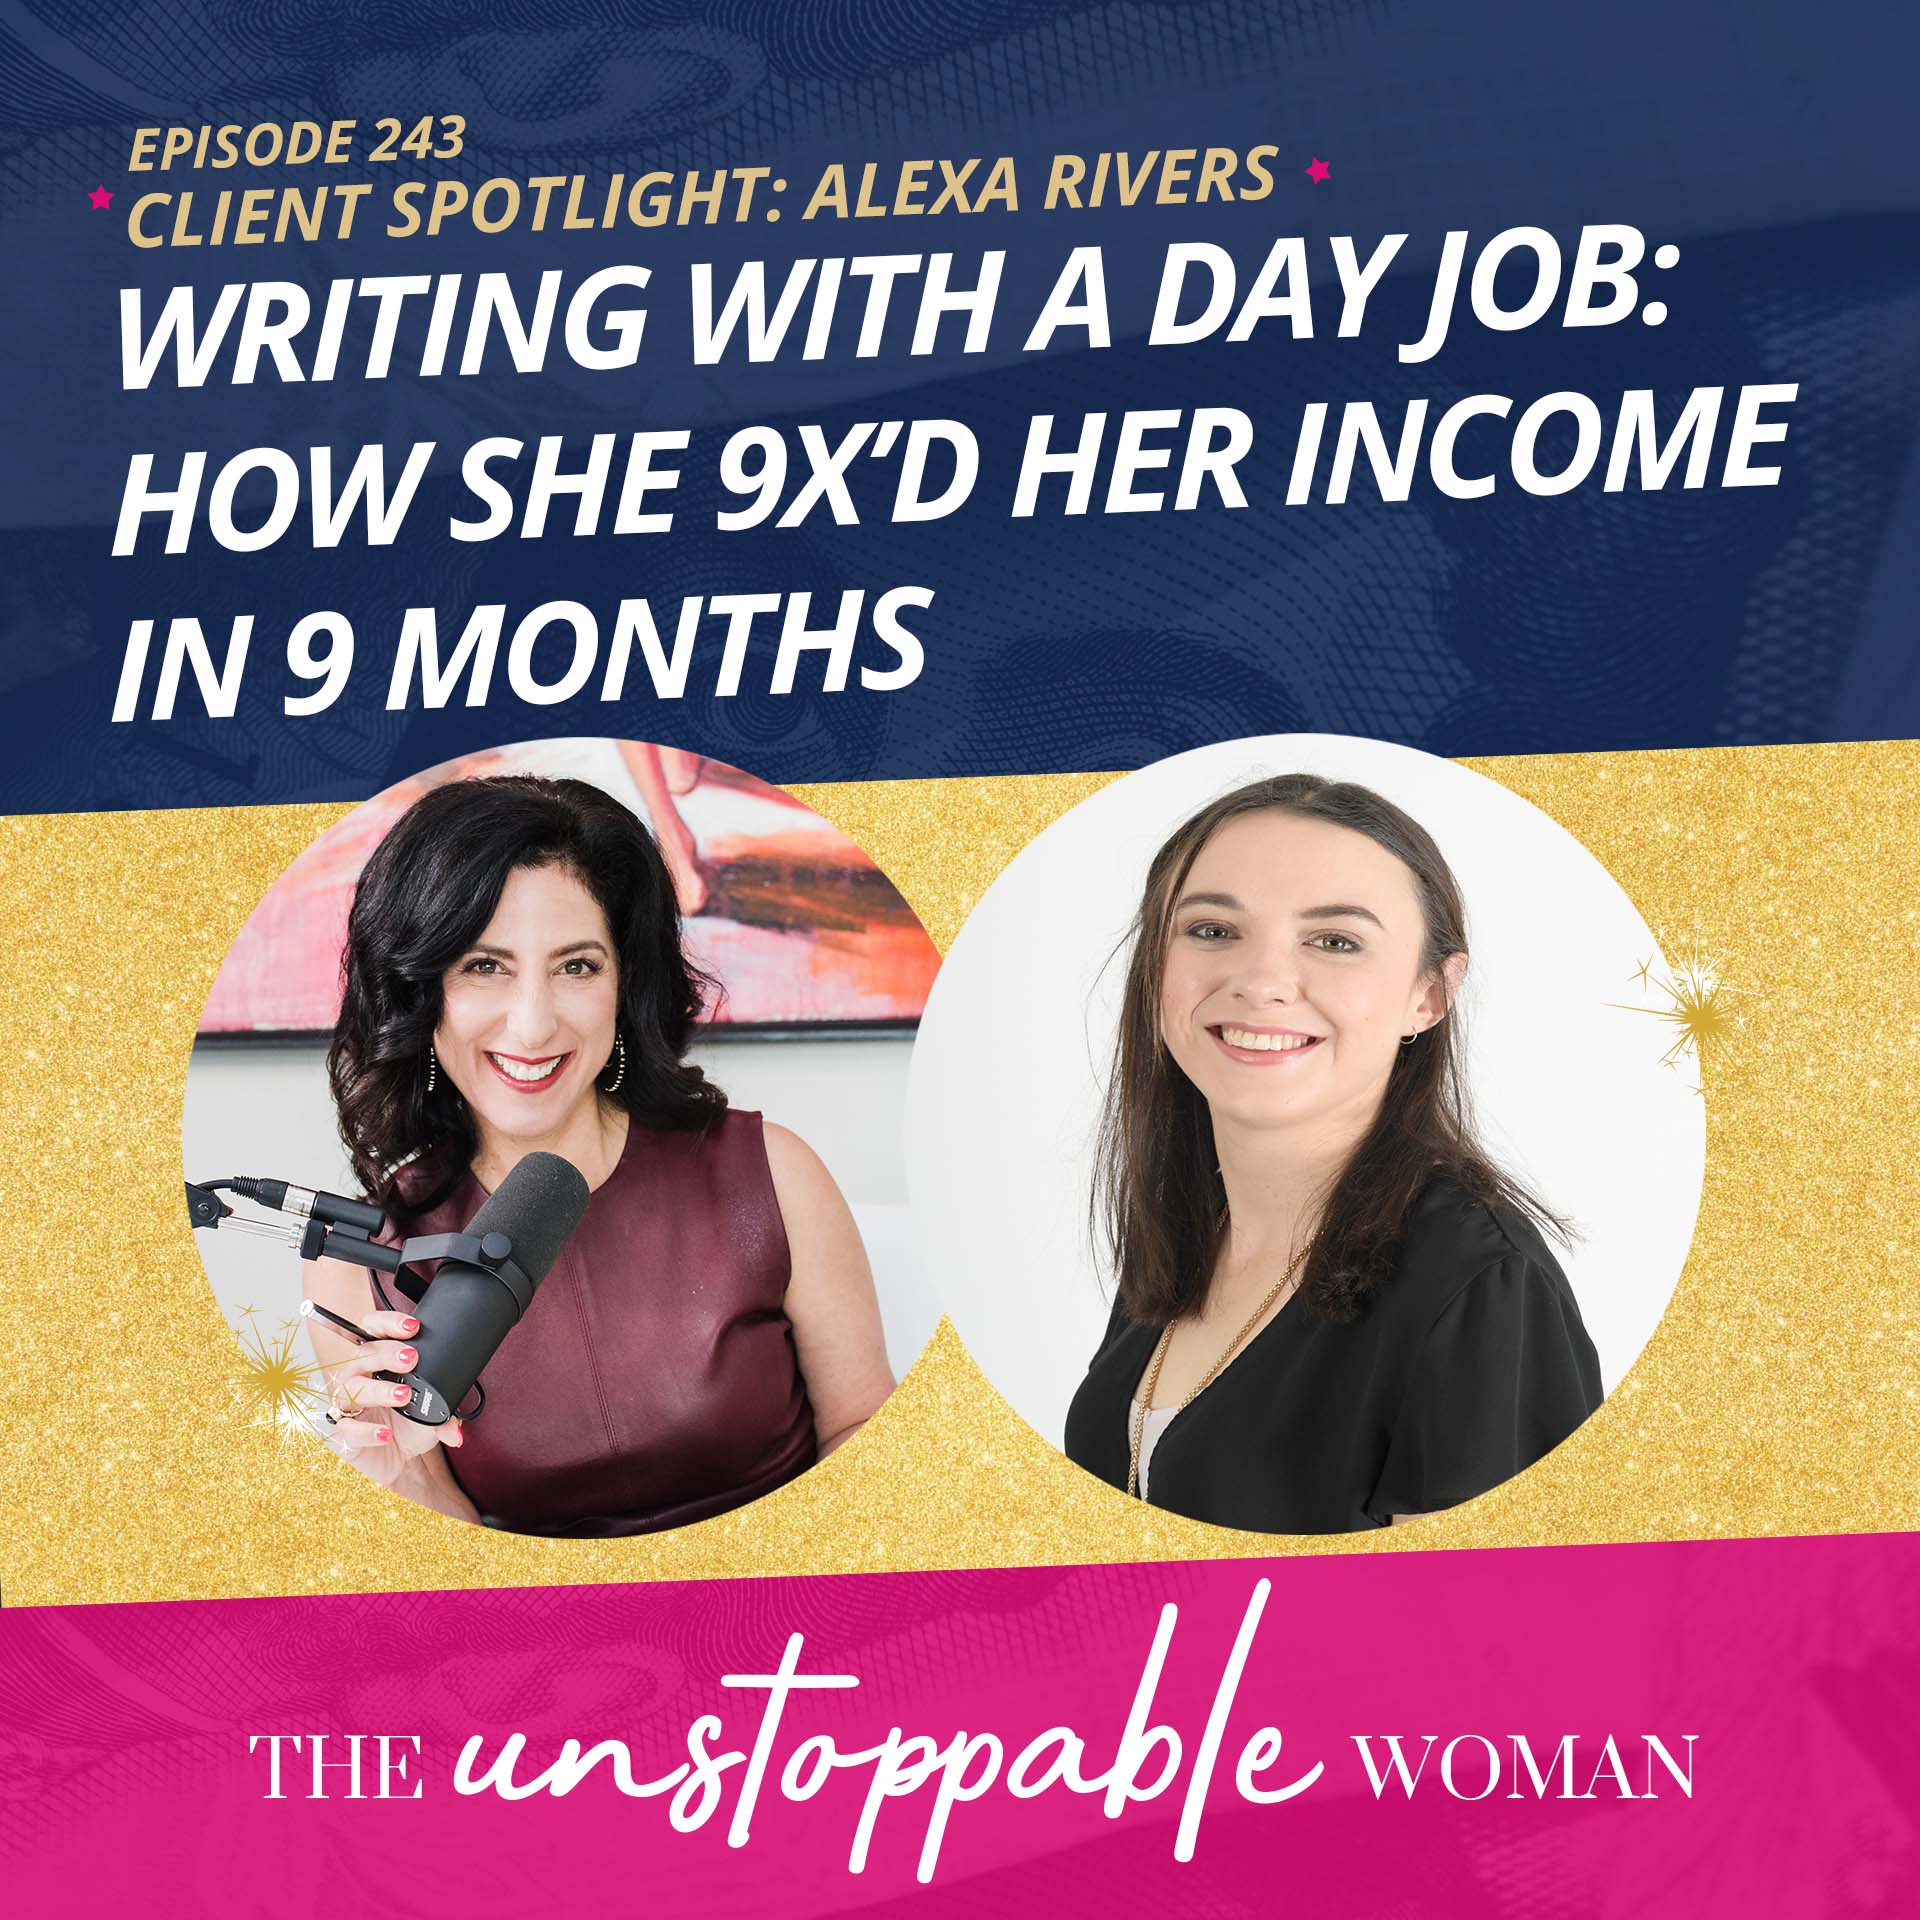 Writing With a Day Job: How She 9X’d Her Income in 9 Months | Client Spotlight | Alexa Rivers